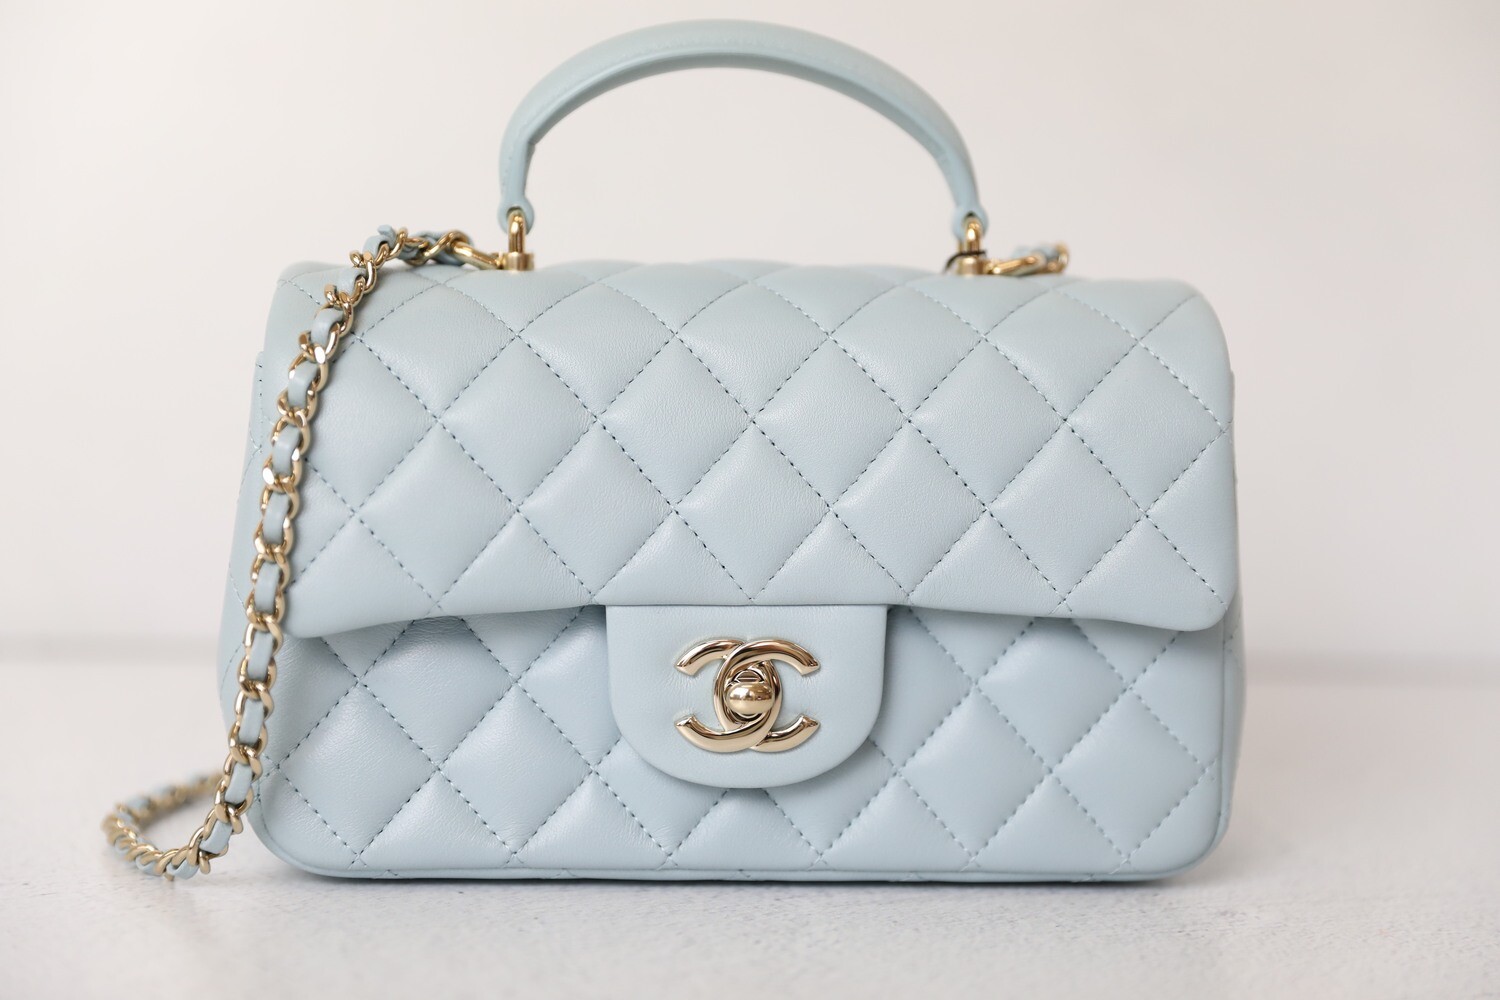 Chanel Classic Jumbo Double Flap, 21A White Caviar Leather, Gold Hardware,  Like New in Dustbag GA003